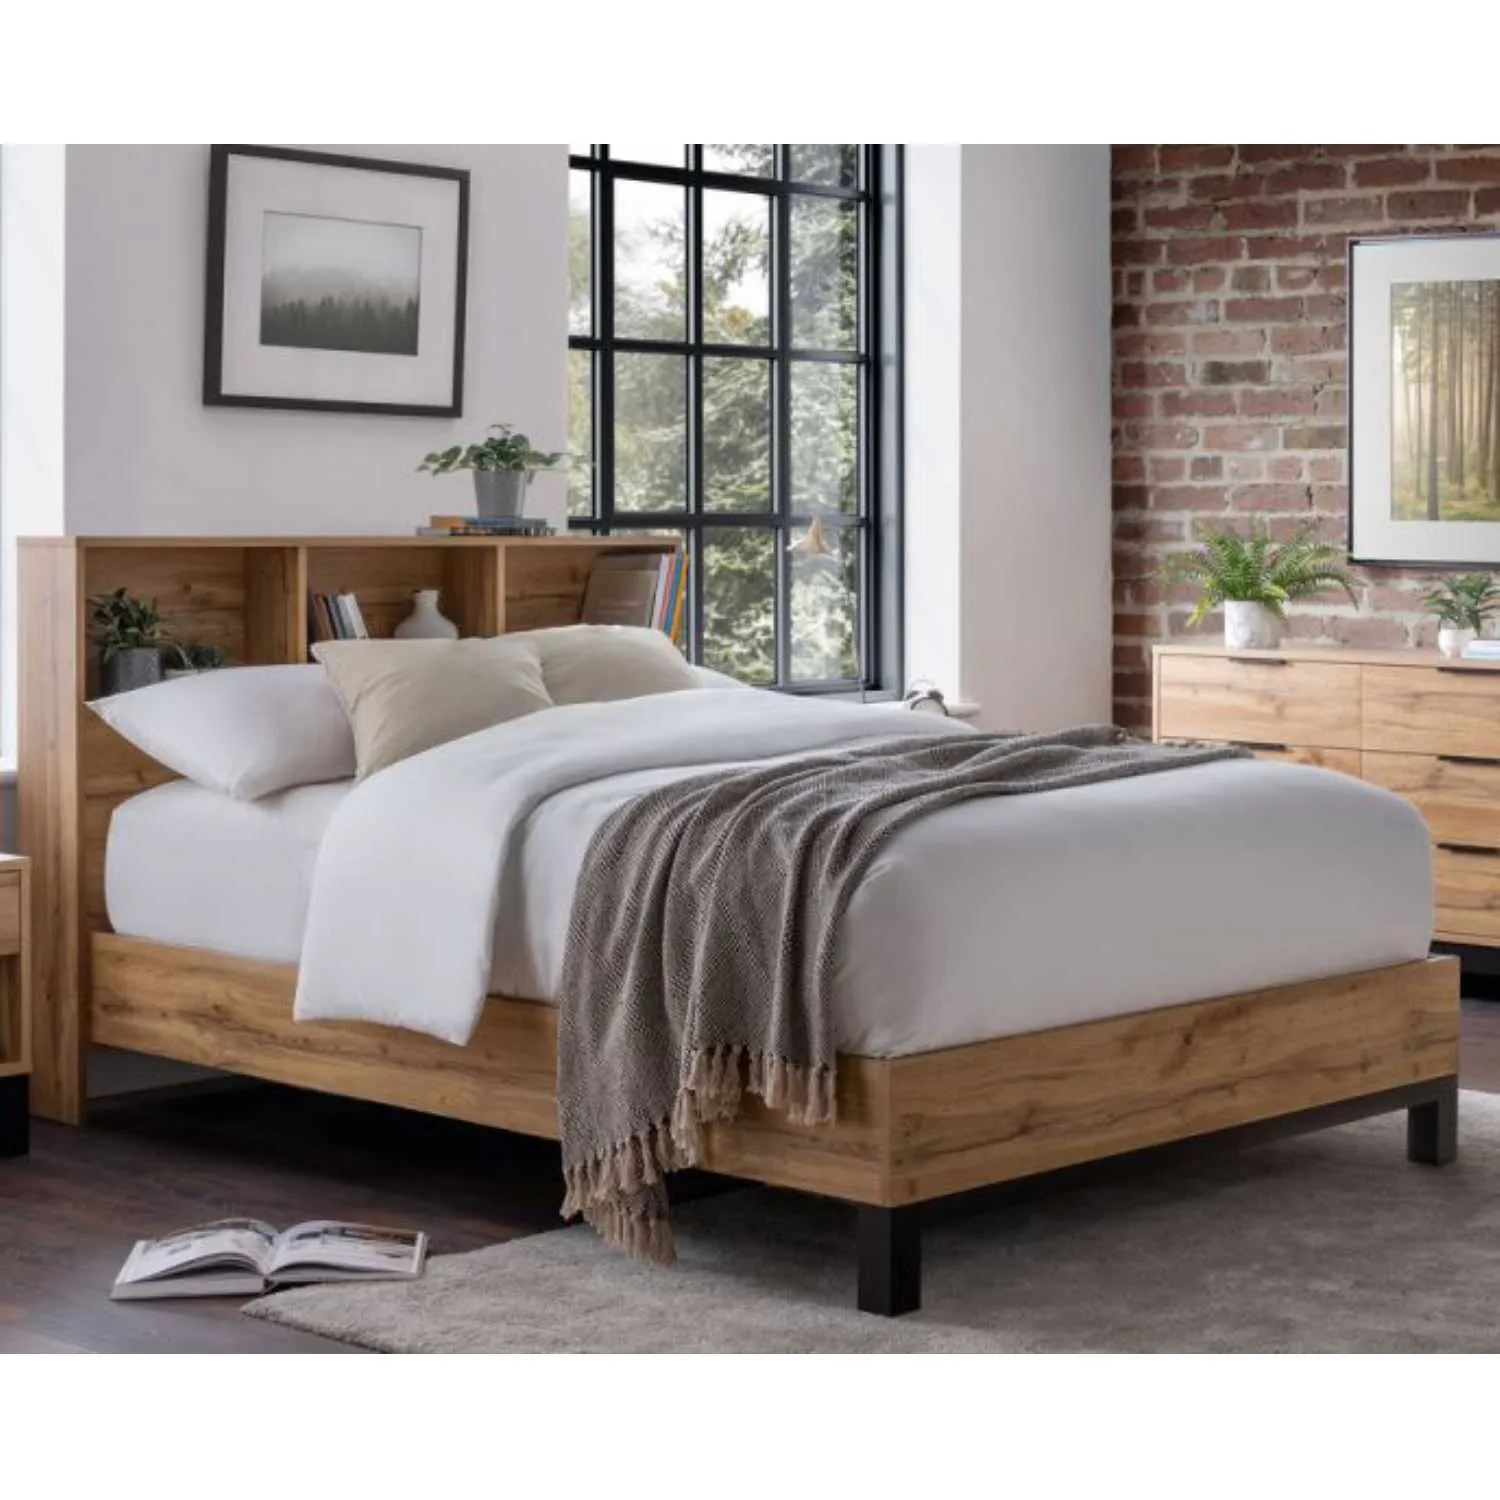 Oak 5ft King Sized 150cm Low Foot End Bed with Bookcase Headboard